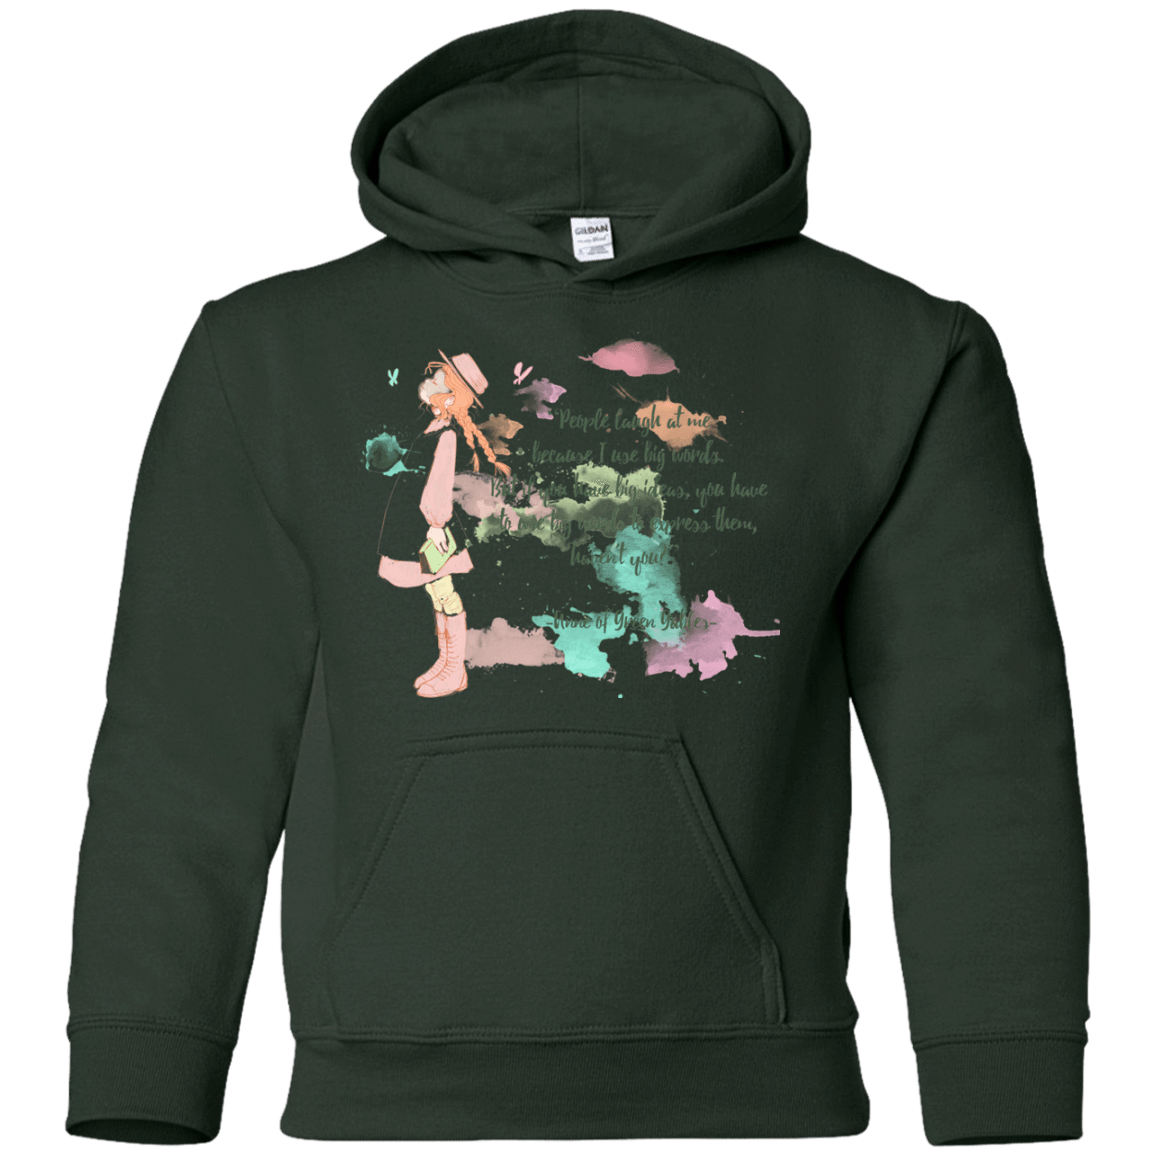 Sweatshirts Forest Green / YS Anne of Green Gables 3 Youth Hoodie